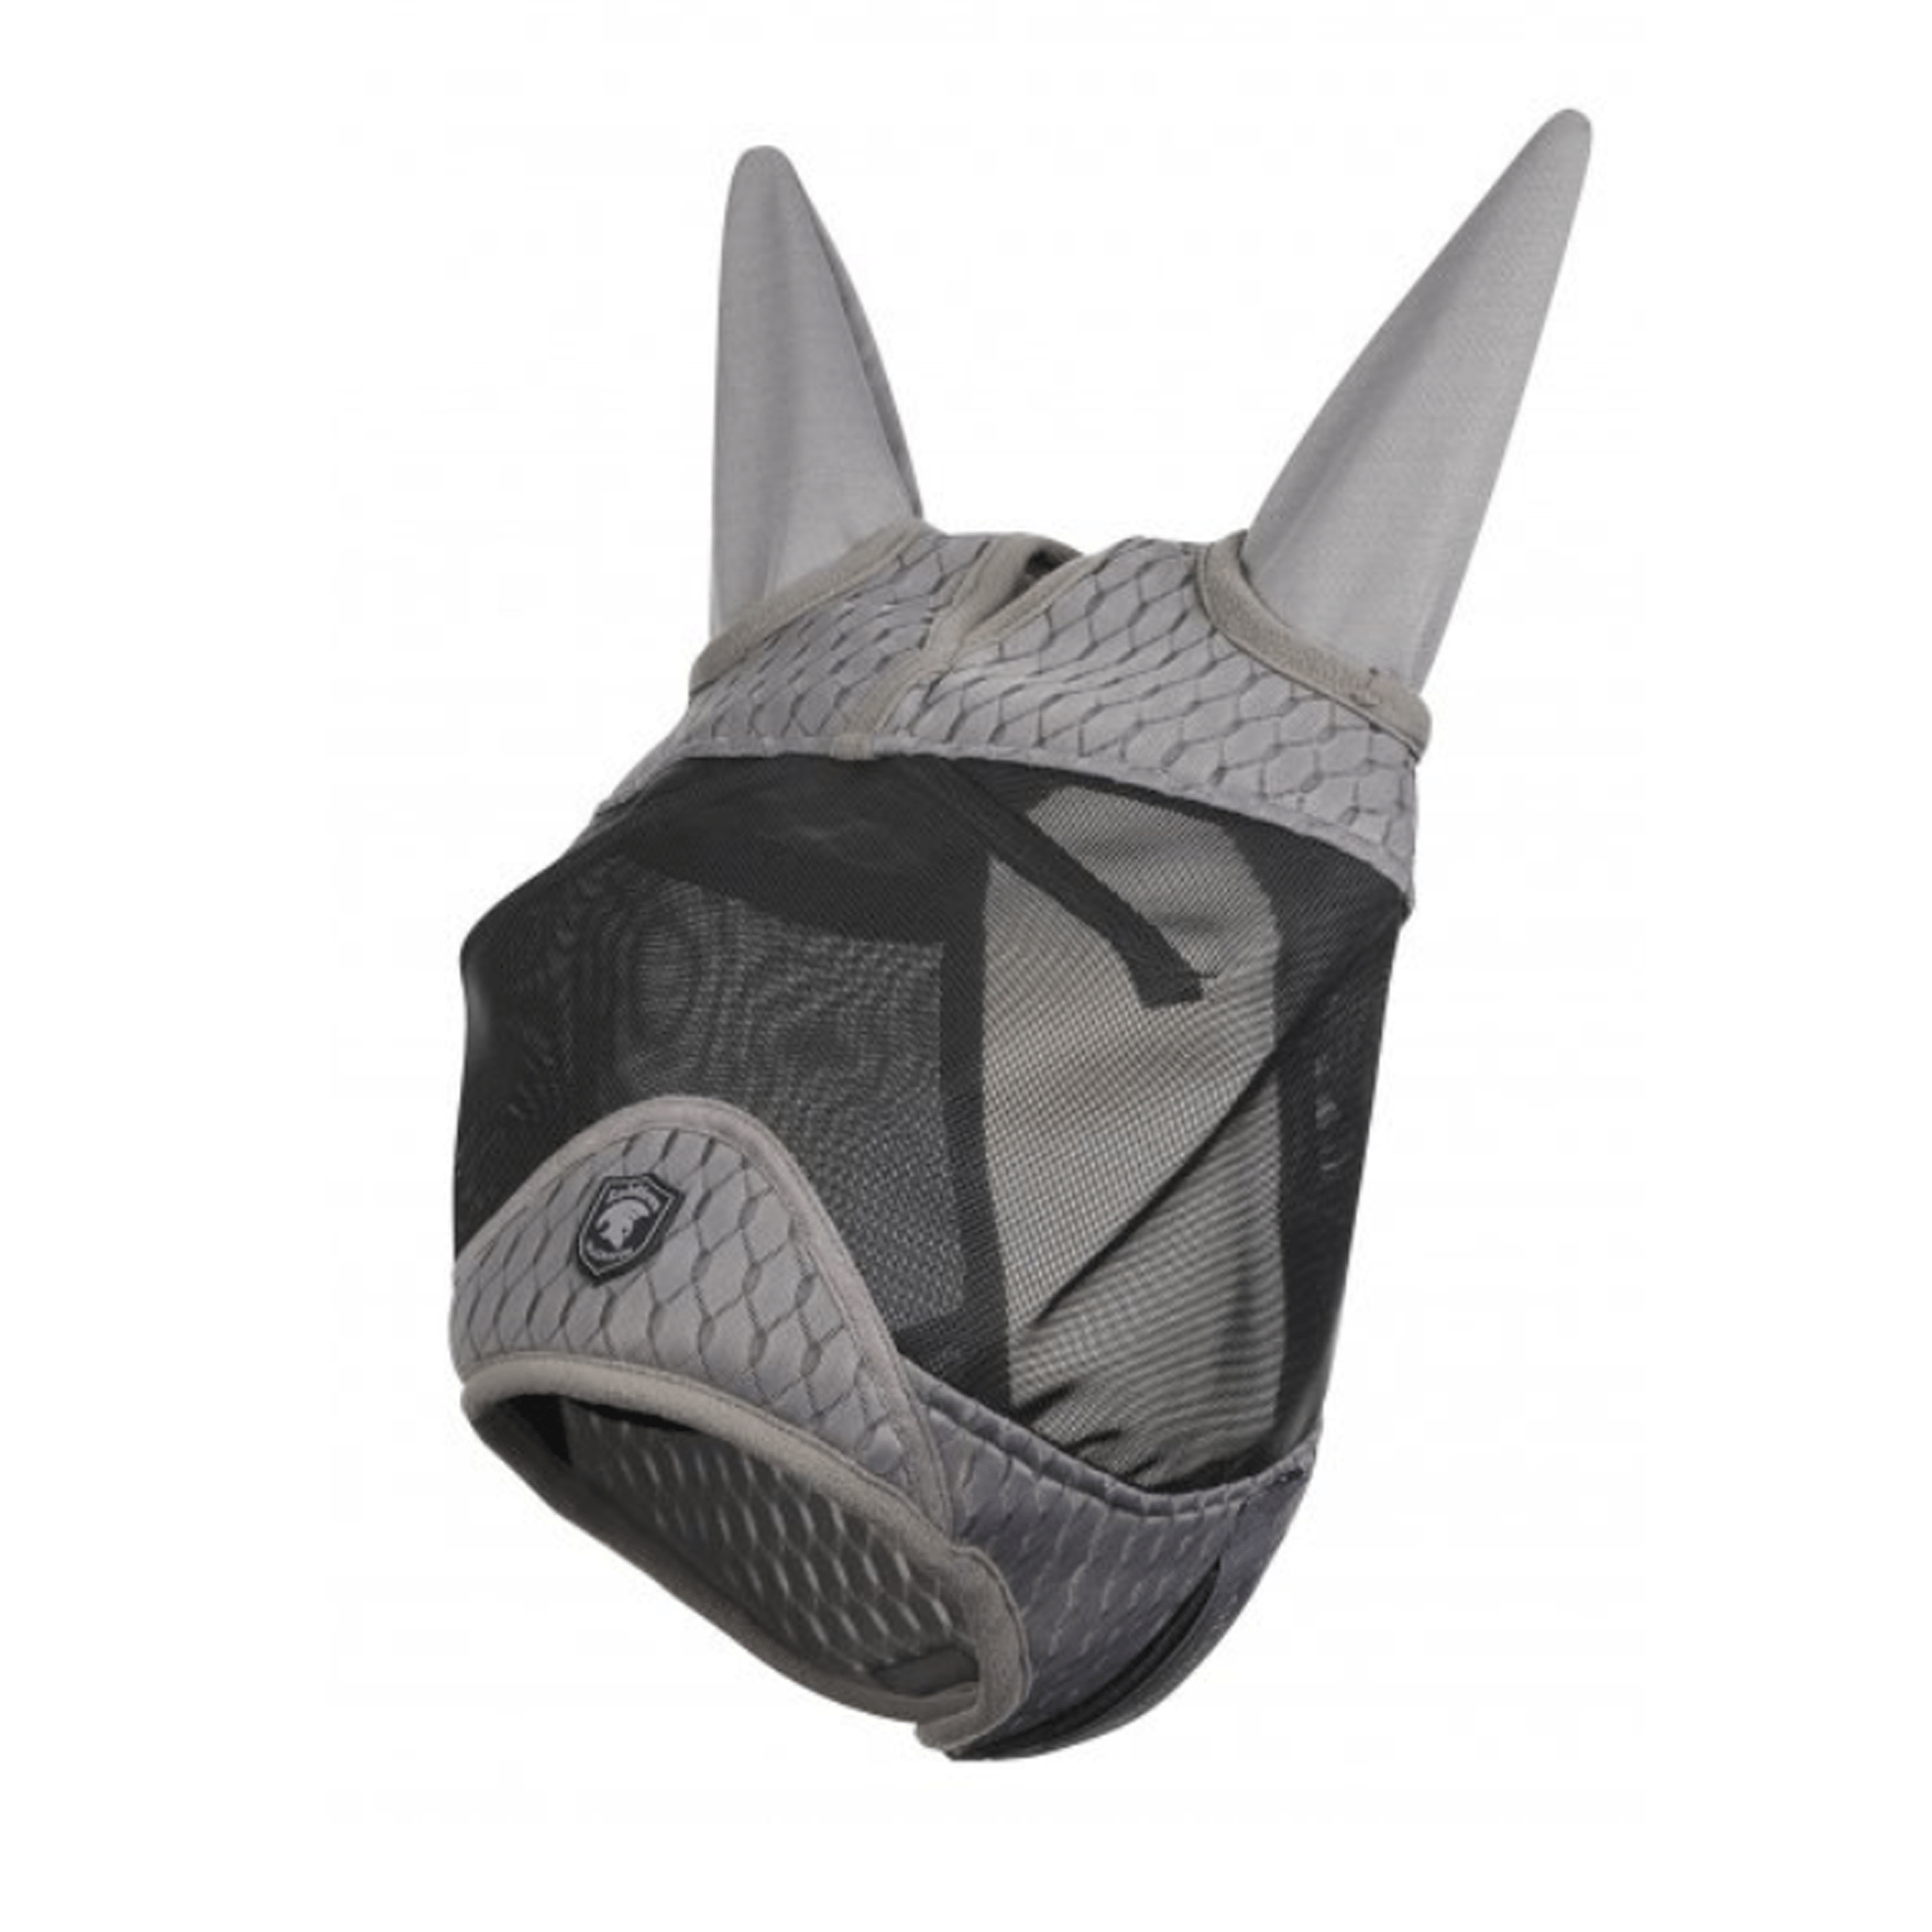 LeMeiux Gladiator Fly Mask with Ears 5969